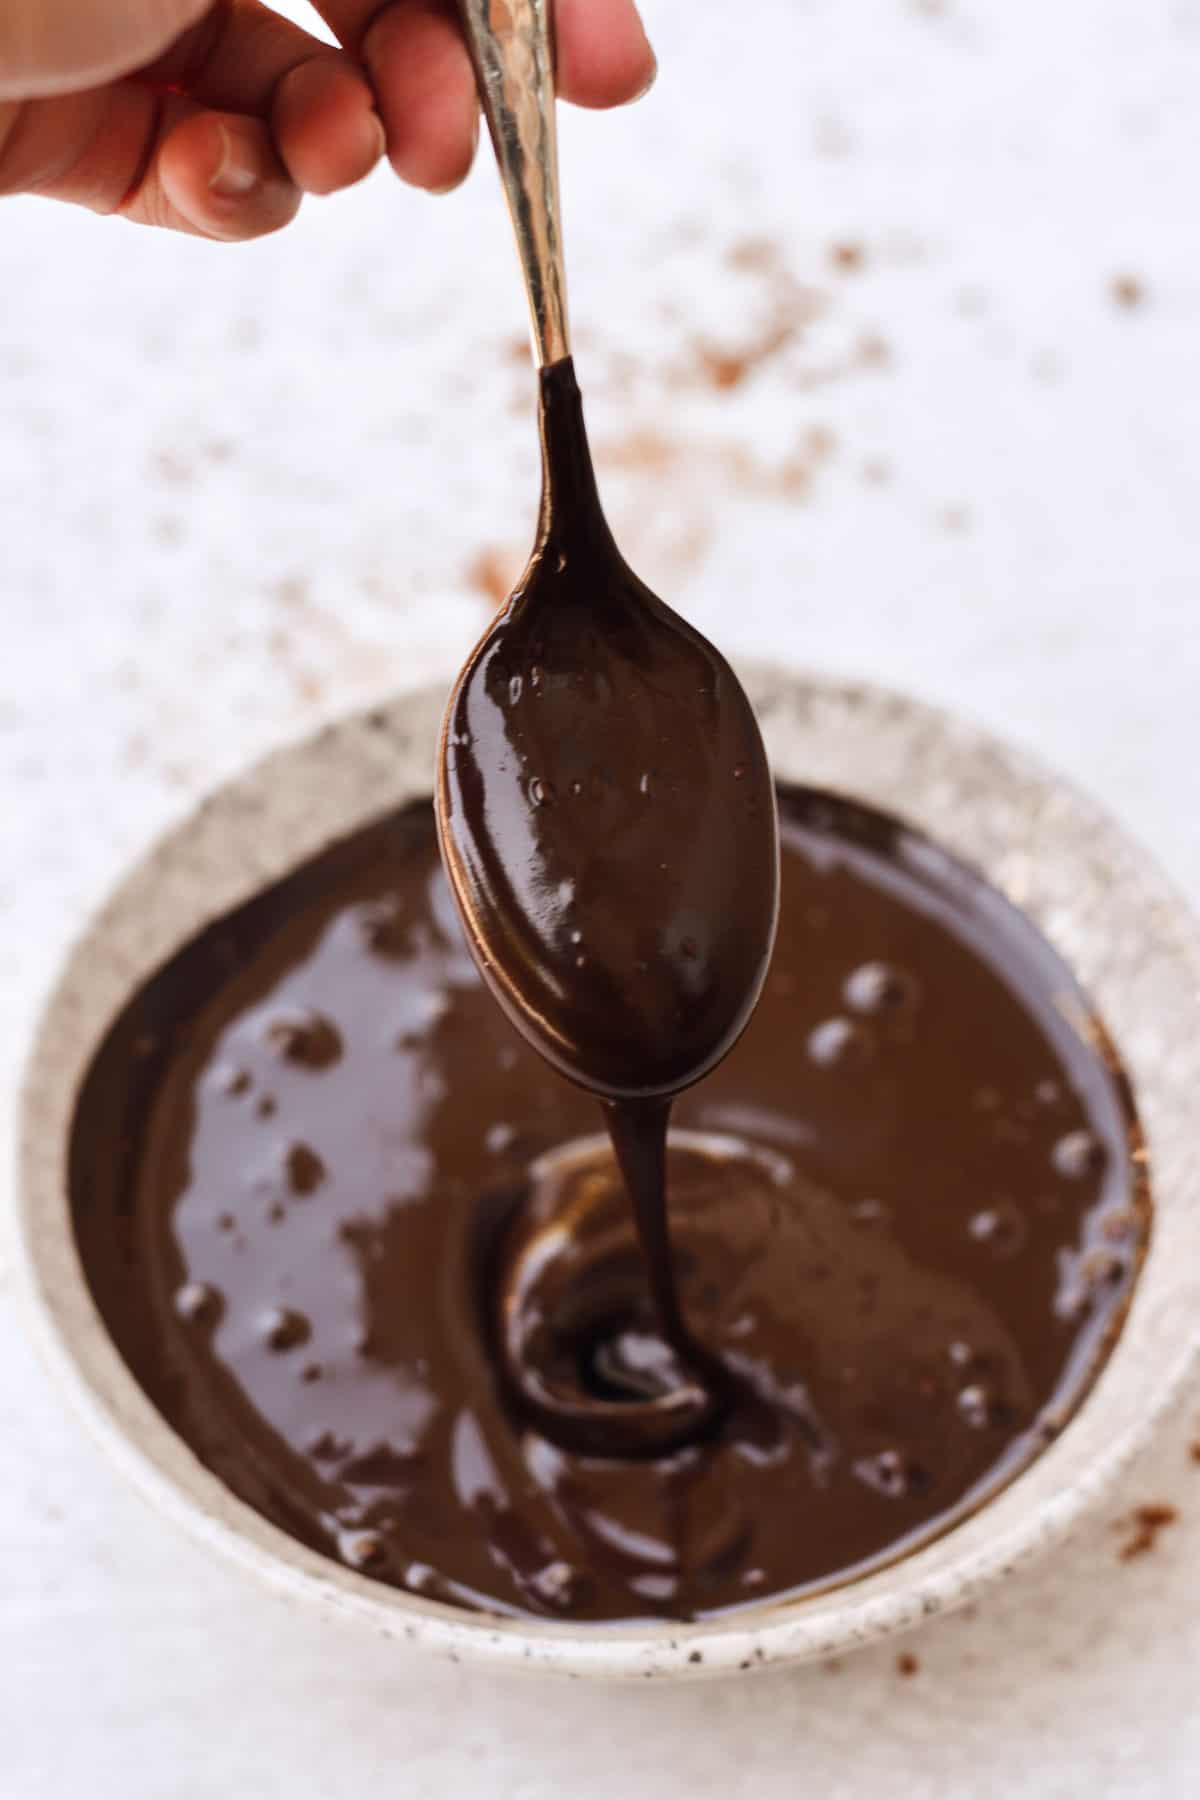 Chocolate sauce dripping off a spoon into a bowl.